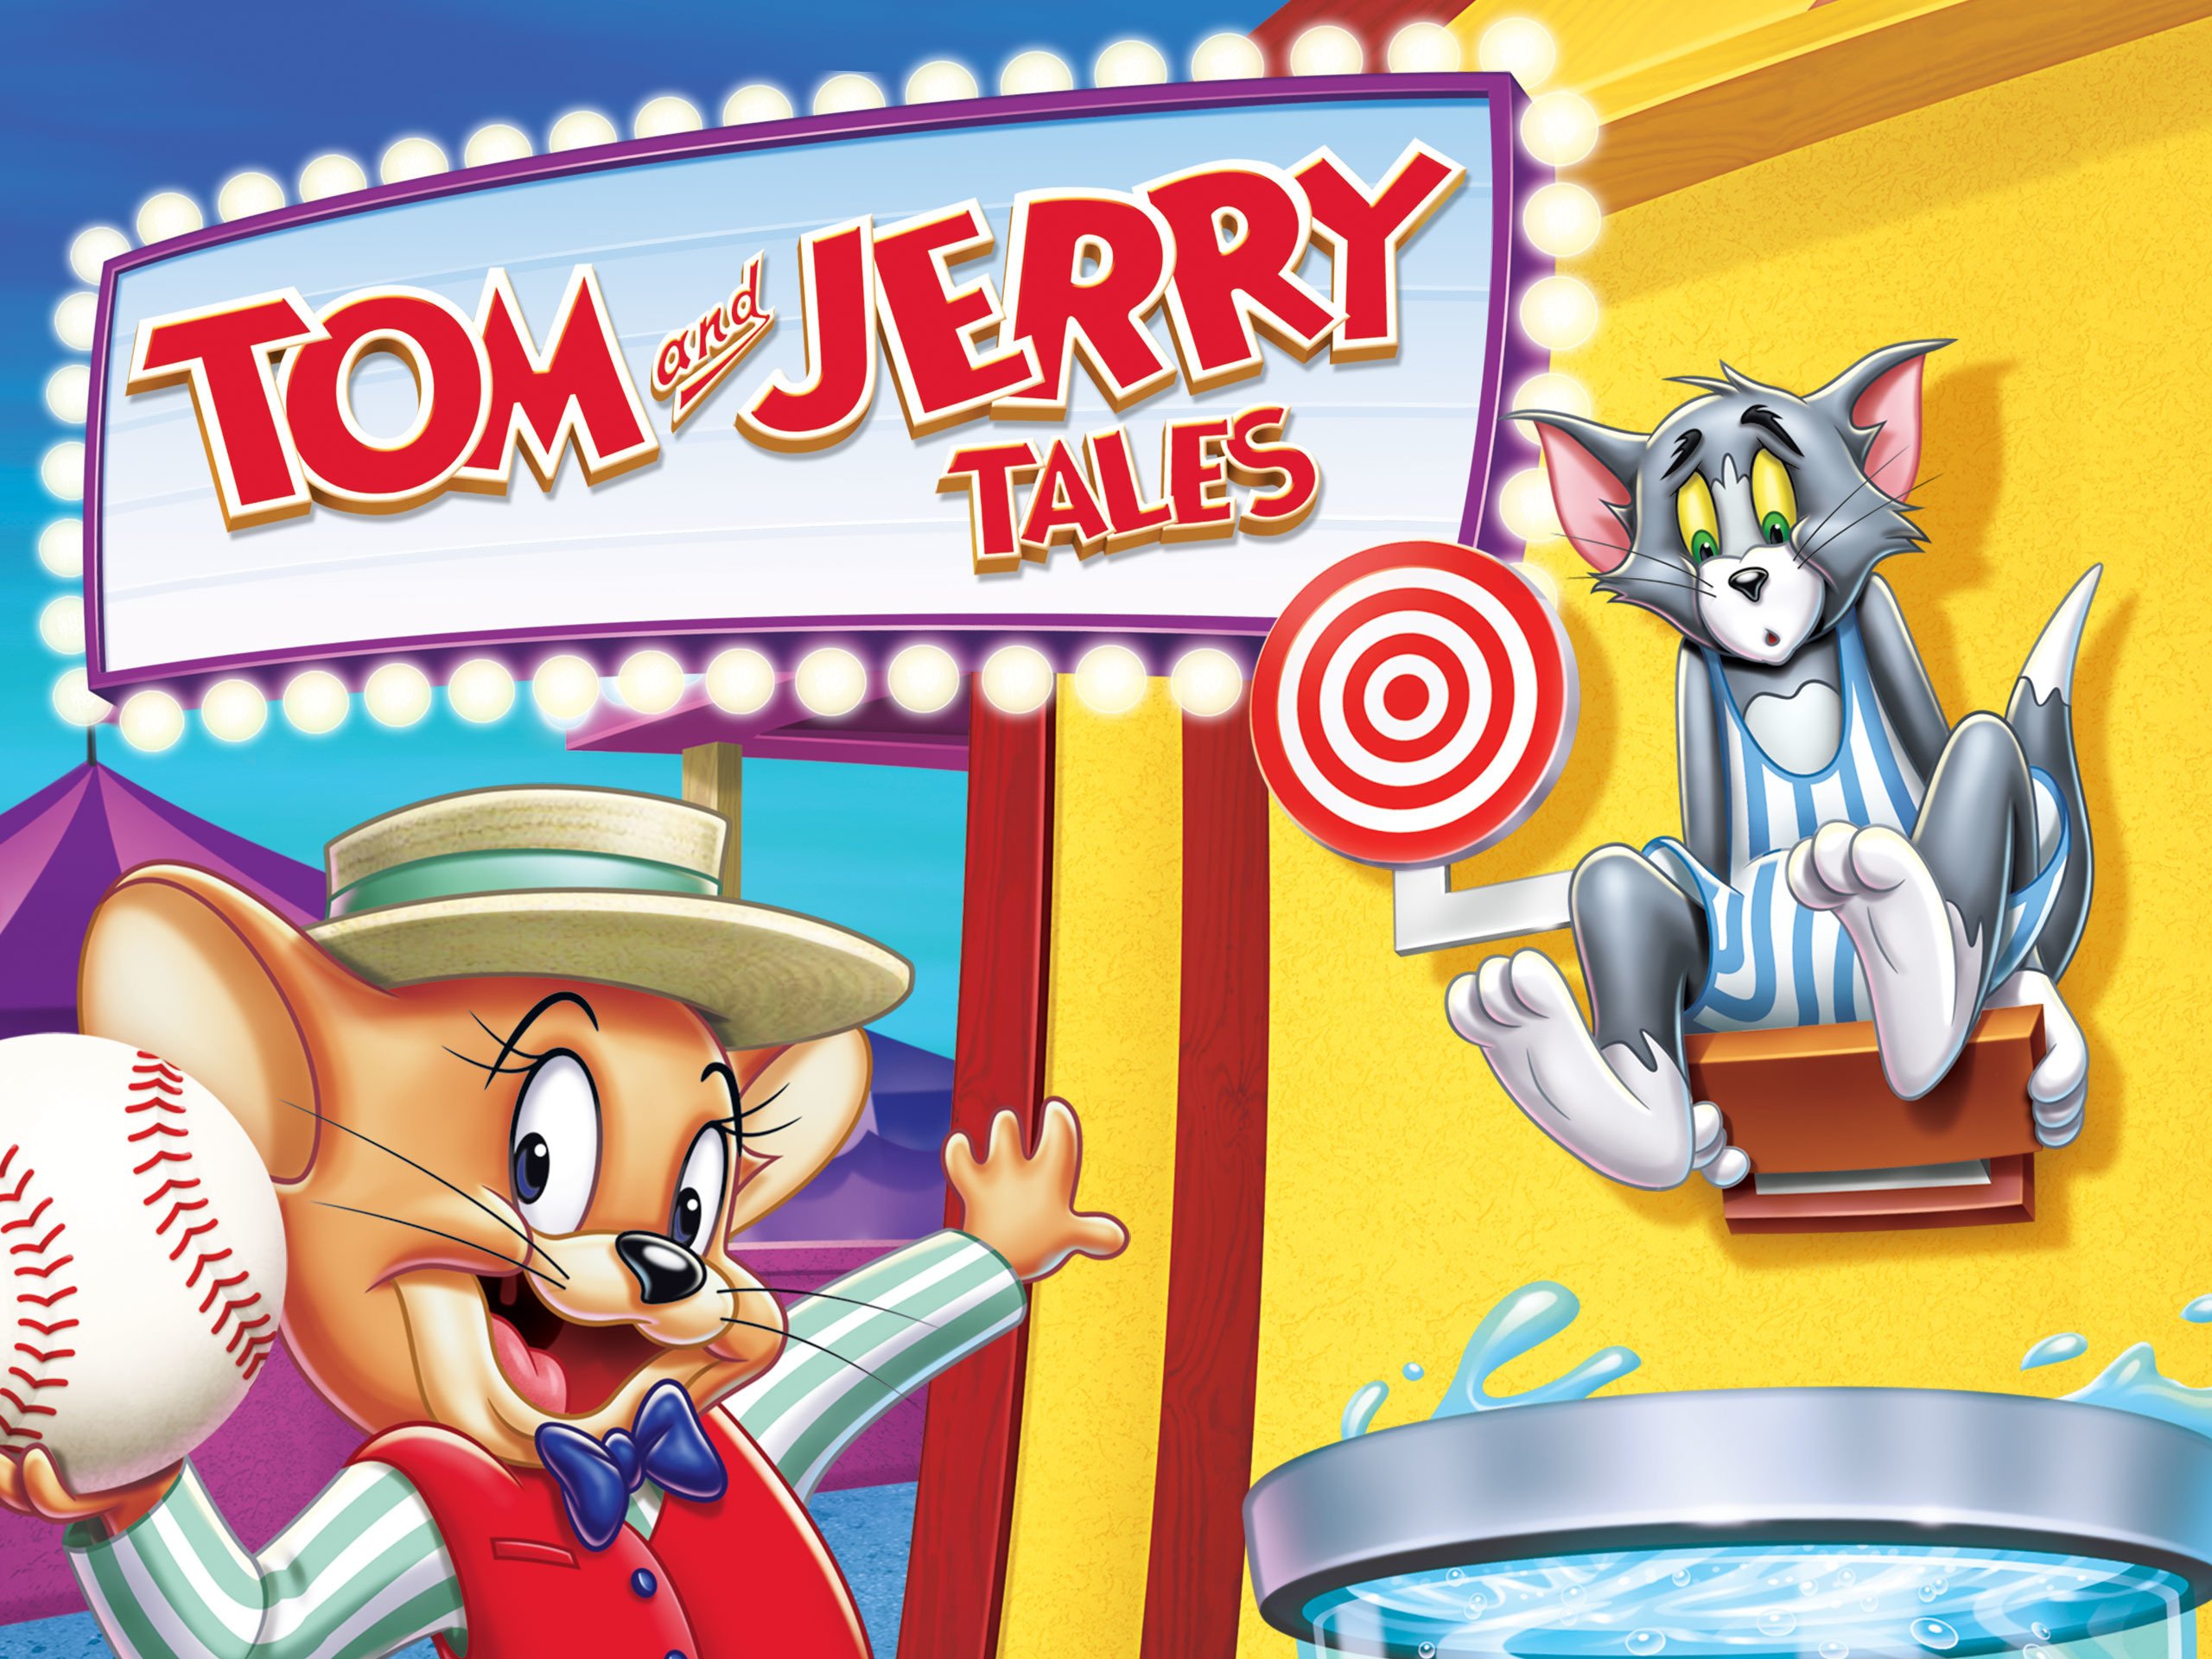 tom and jerry tales full episodes torrent download